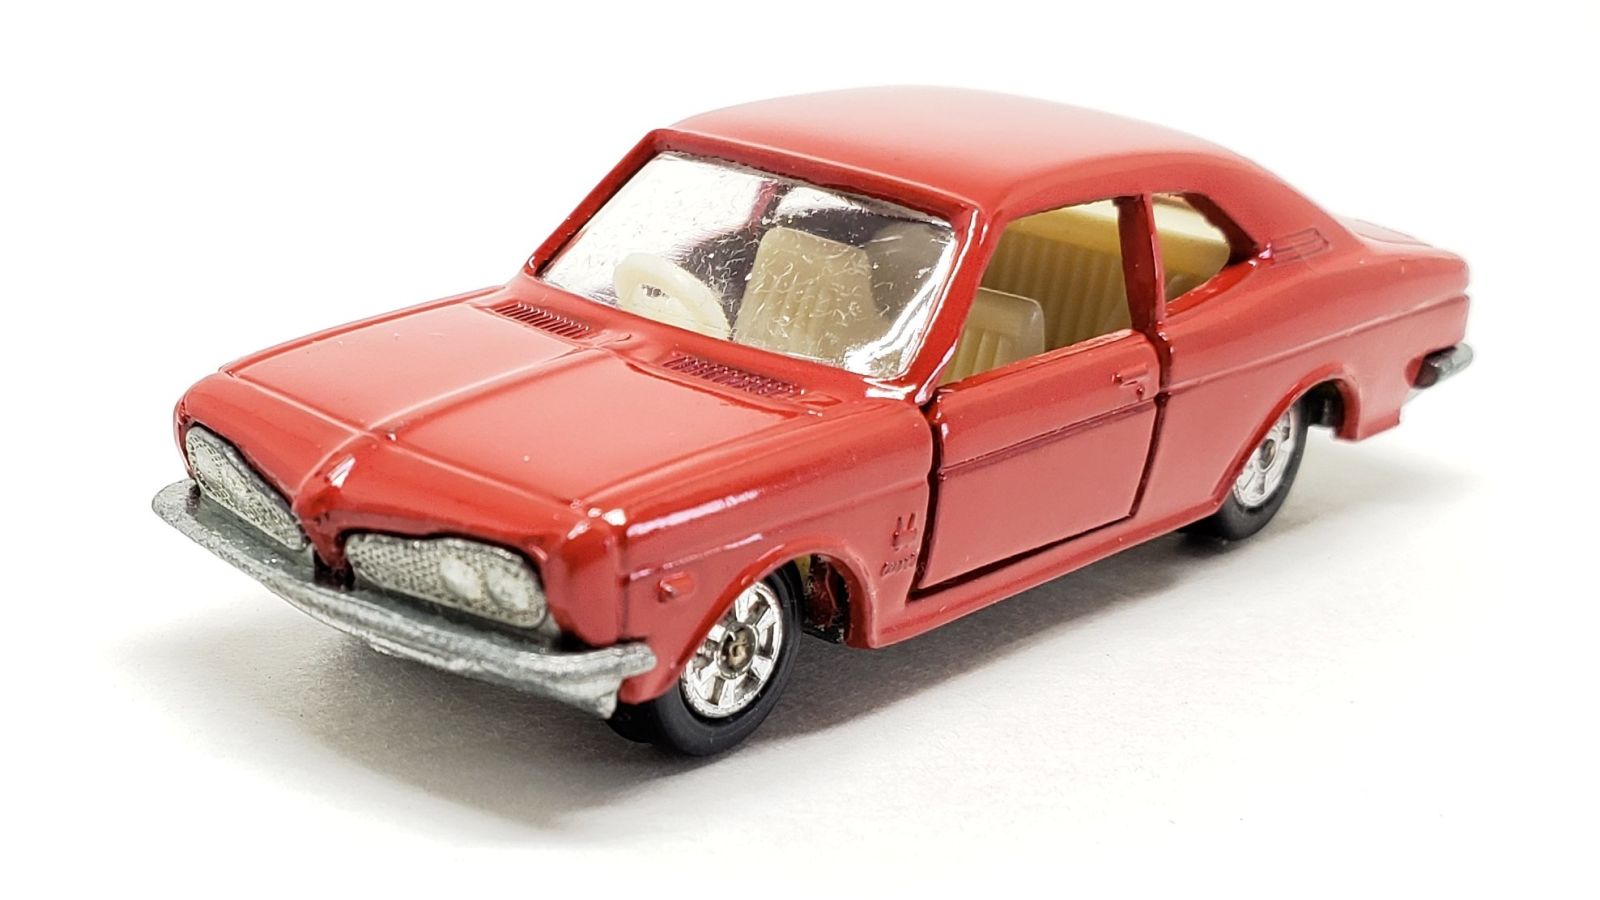 Illustration for article titled [REVIEW] Tomica Honda 1300 Coupe 9